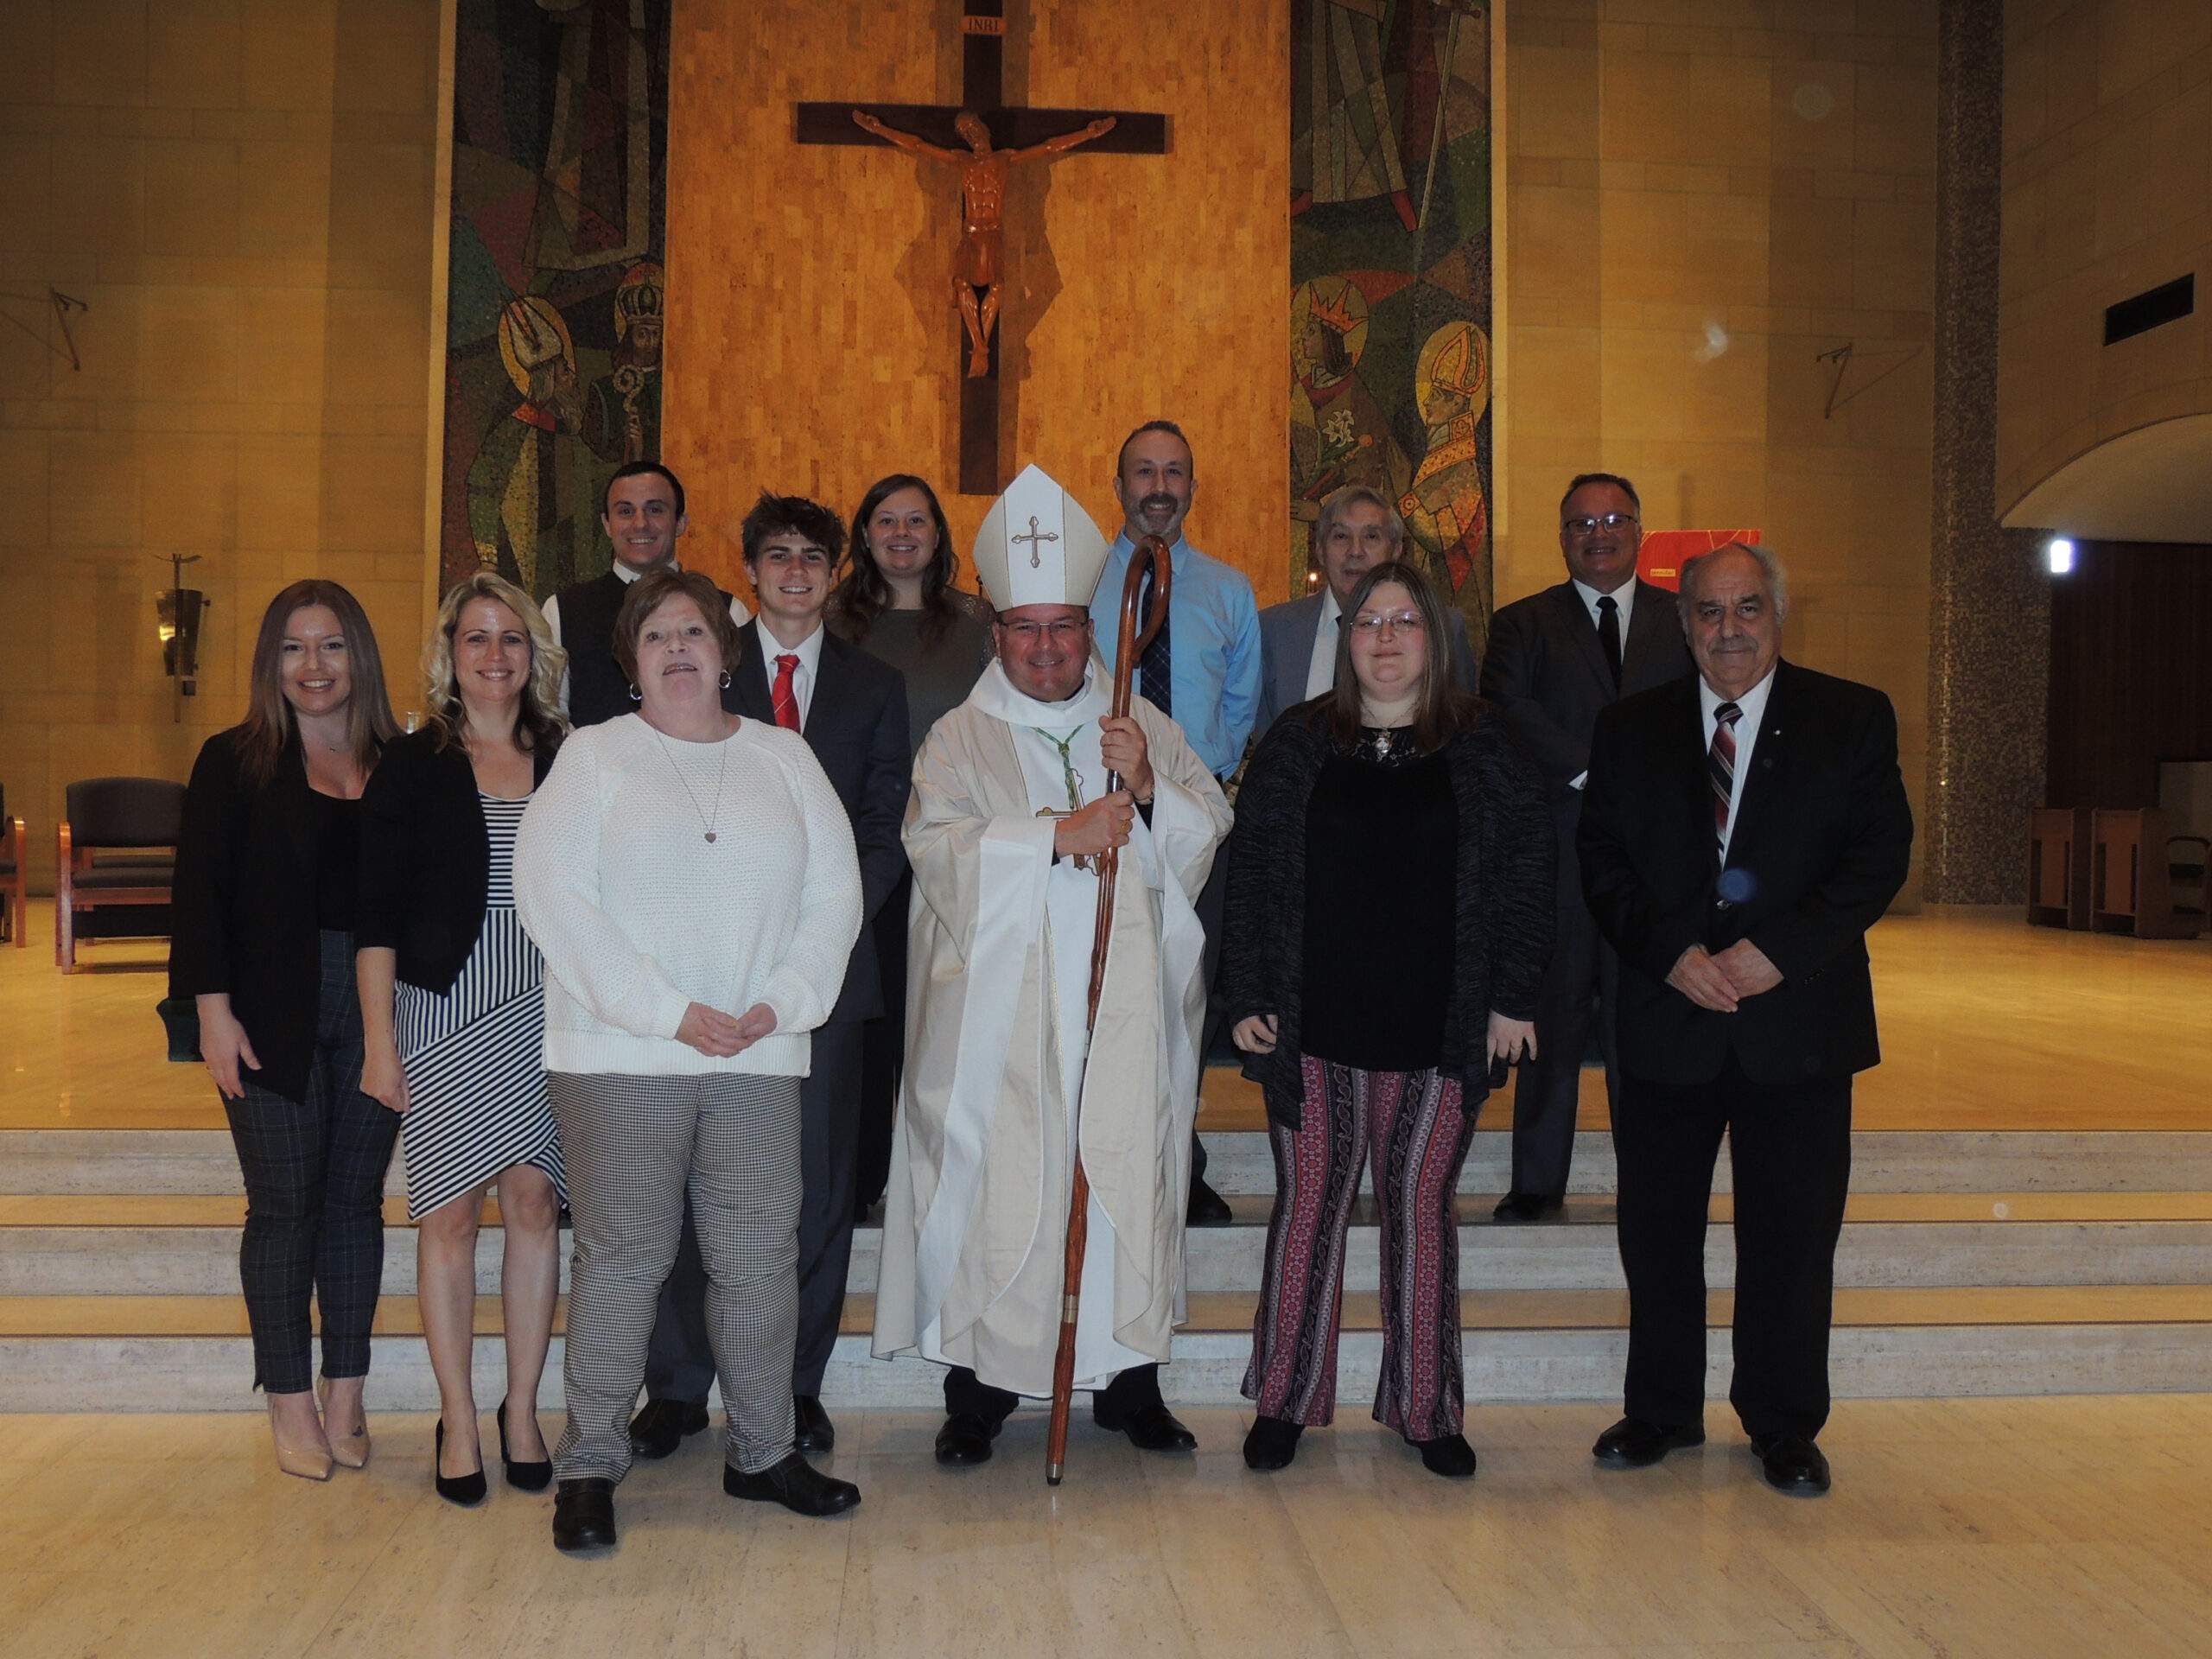 Eleven confirmands pose with Bishop Bonnar at St. Columba Cathedral